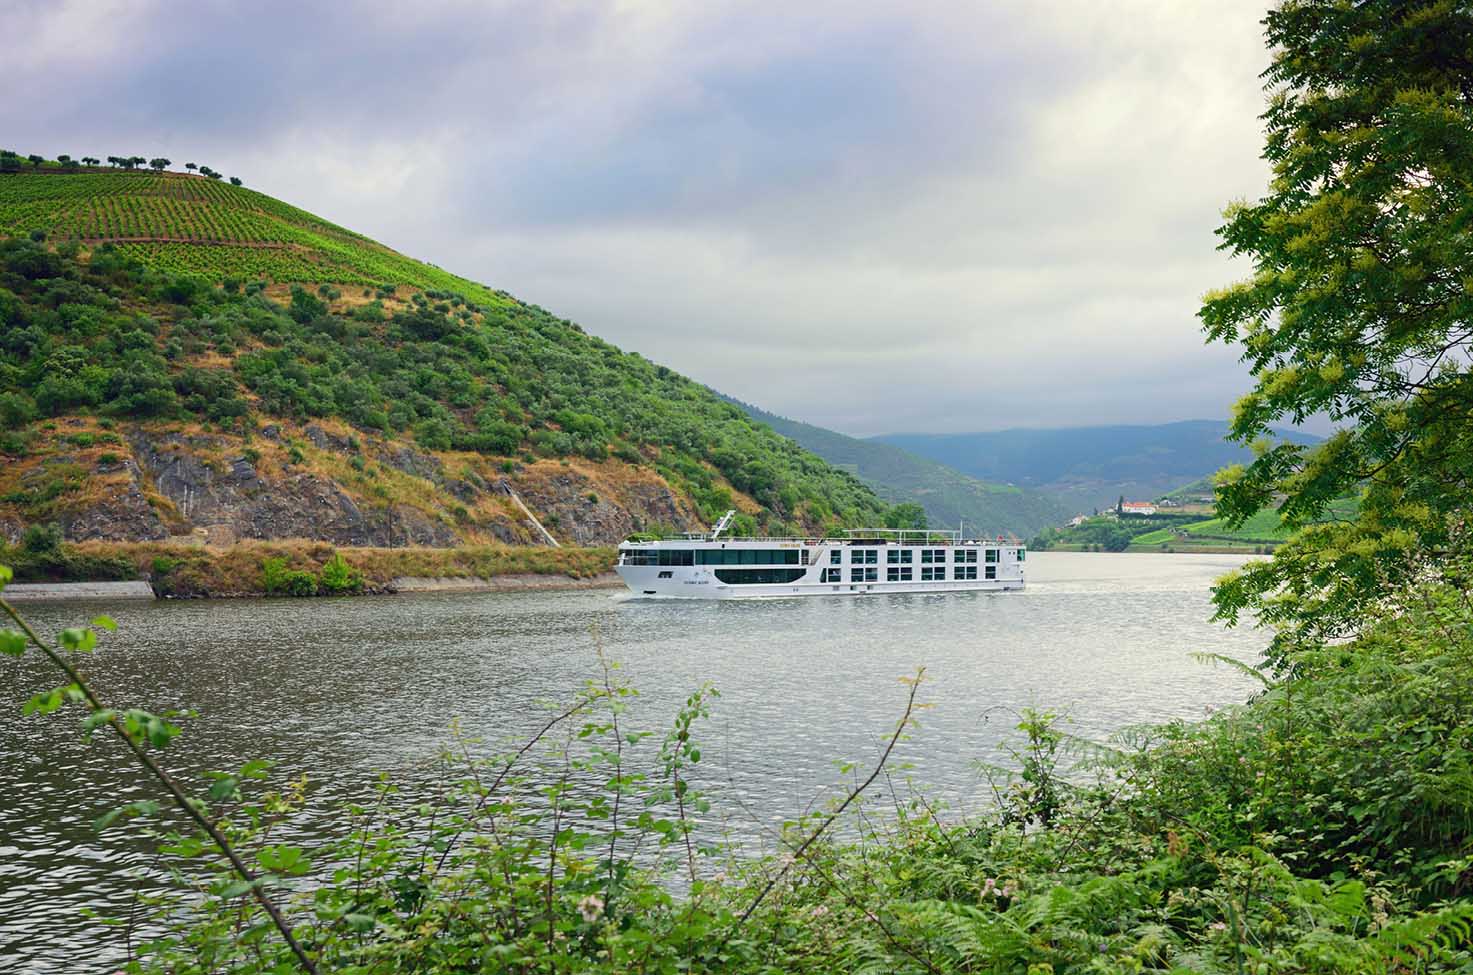 Scenic Azure cruising the Douro Valley in Portugal. 